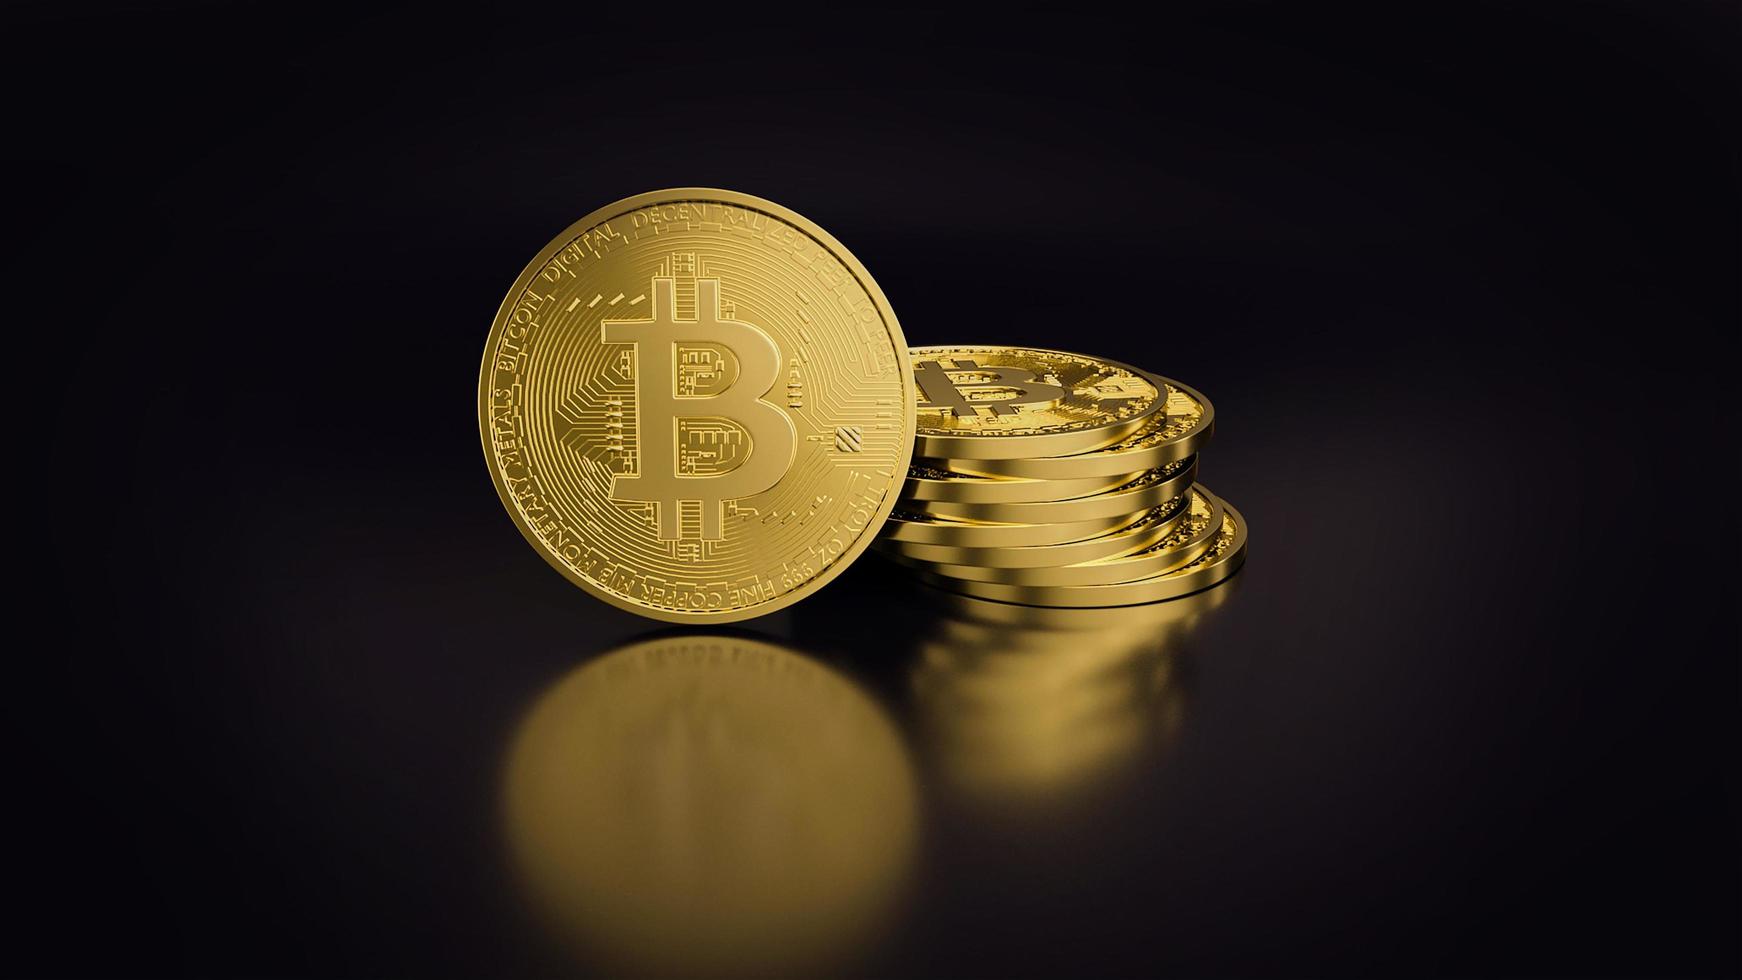 stack of bitcoin digital currency. Cryptocurrency BTC the new virtual money Close up 3D render of golden Bitcoins on black background photo